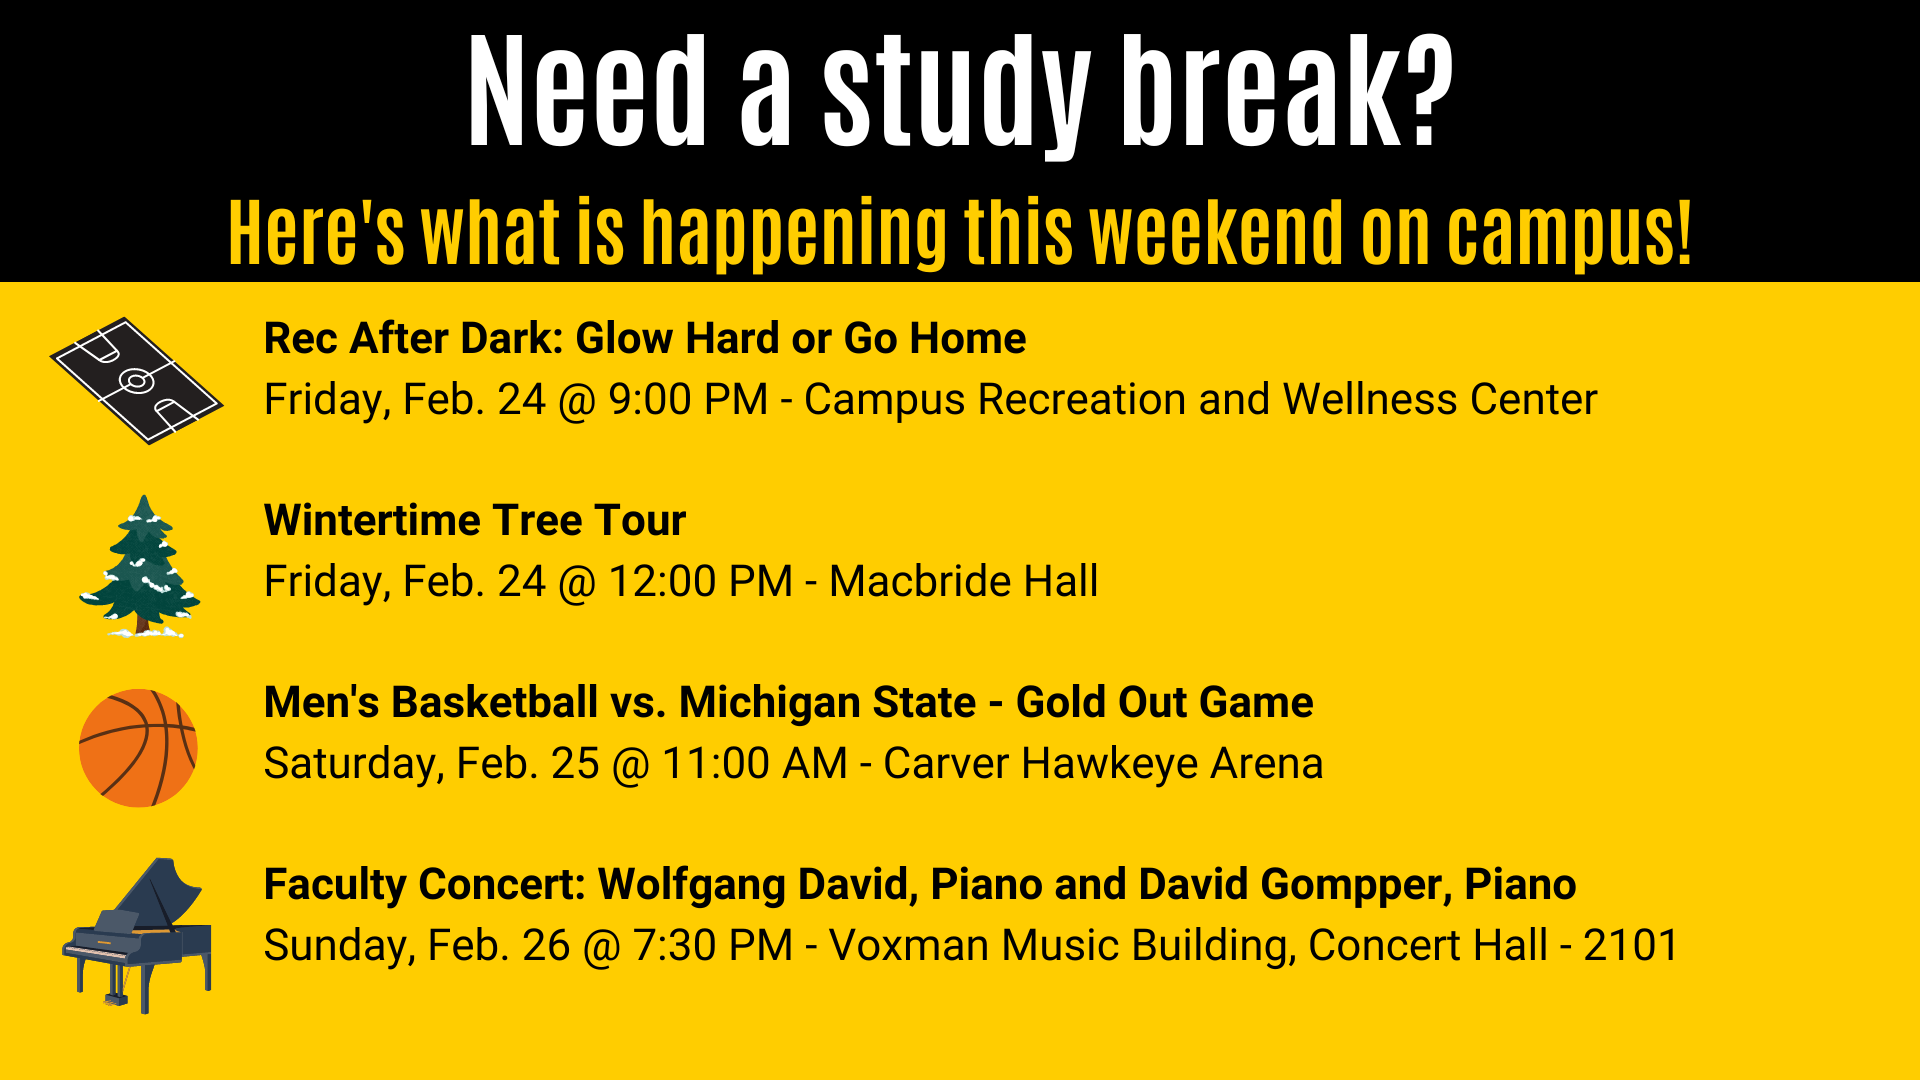 Wintertime Tree Tour Friday, Feb. 24 @ 12:00 PM - Macbride Hall Rec After Dark: Glow Hard or Go Home Friday, Feb. 24 @ 9:00 PM - Campus Recreation and Wellness Center Need a study break? Here's what is happening this weekend on campus! Men's Basketball vs. Michigan State - Gold Out Game Saturday, Feb. 25 @ 11:00 AM - Carver Hawkeye Arena Faculty Concert: Wolfgang David, Piano and David Gompper, Piano Sunday, Feb. 26 @ 7:30 PM - Voxman Music Building, Concert Hall - 2101